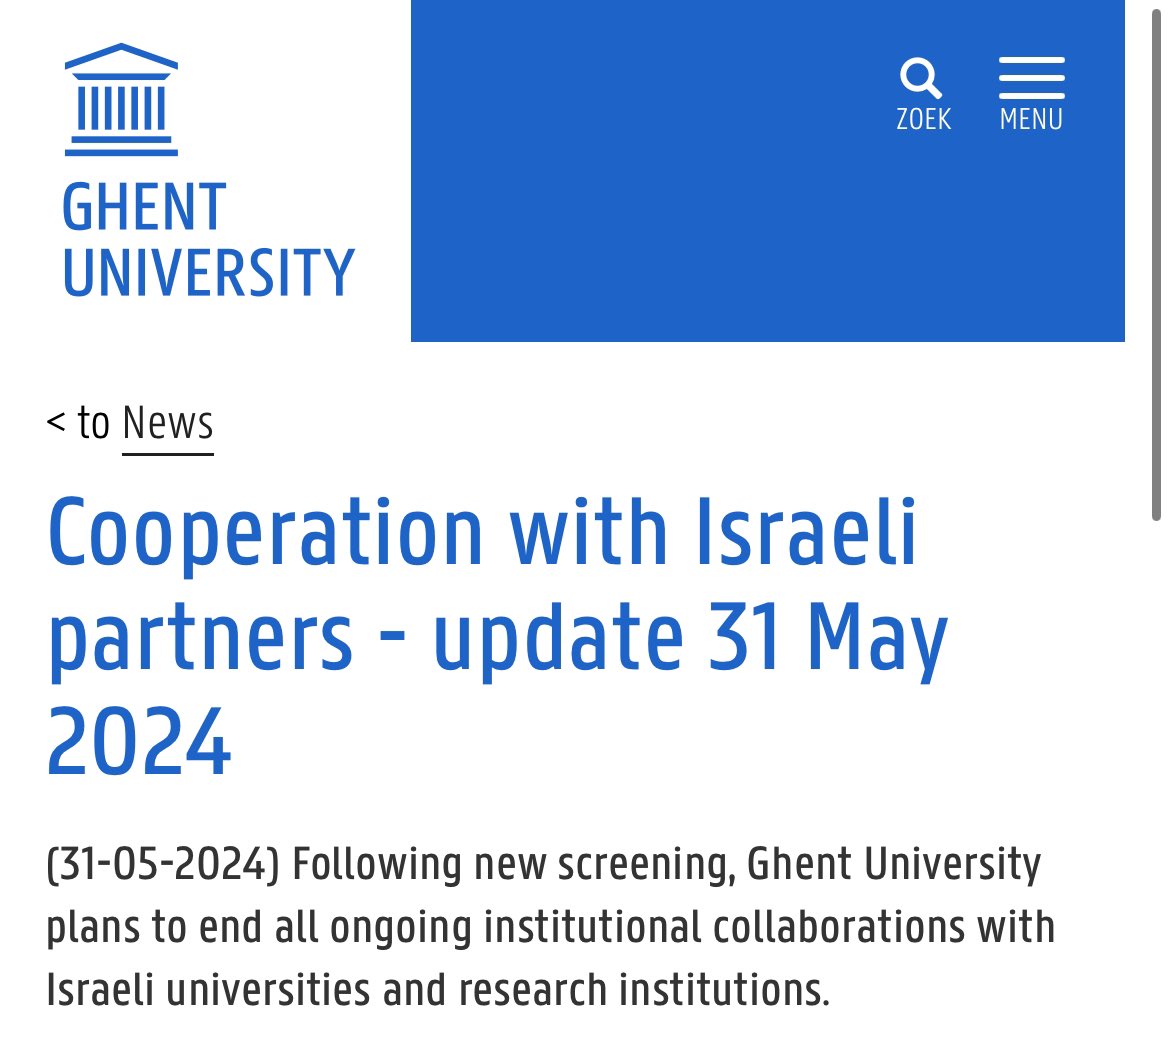 This is big. One of Europe’s biggest universities, Ghent  in Belgium, will discontinue all institutional collaborations with Israeli universities and research institutions. Never doubt that the global movement for Palestinian liberation is working. 

ugent.be/en/news-events…